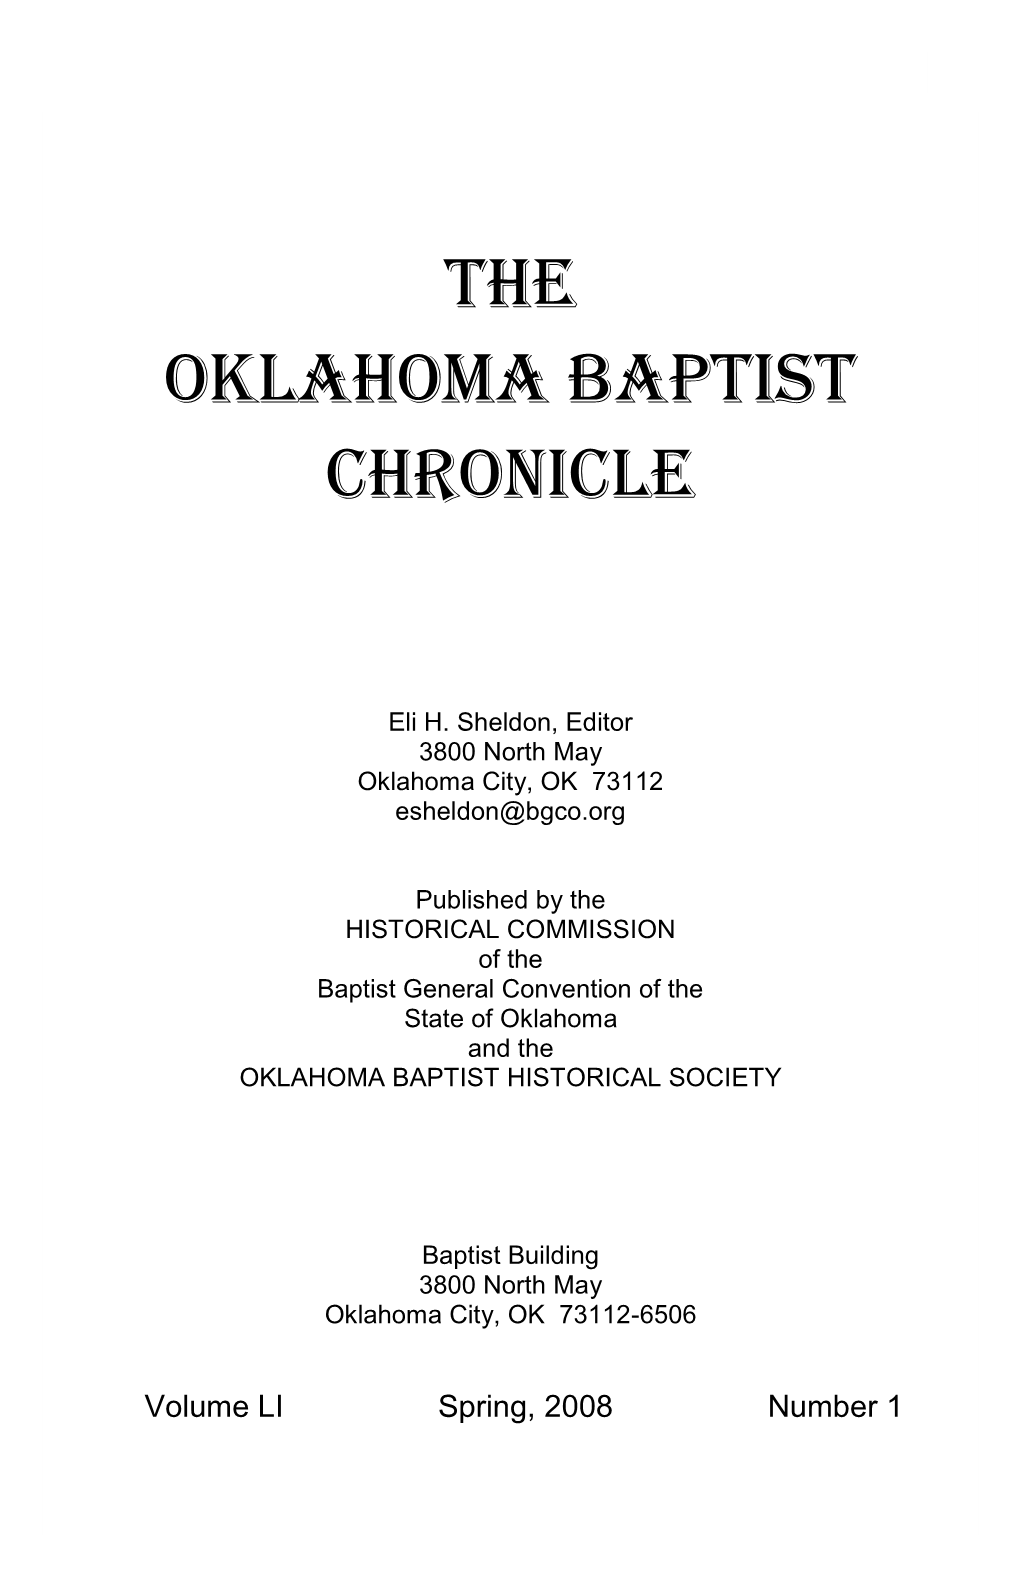 The Oklahoma Baptist Chronicle Women’S Work, and a 21 Page Review by Robert Haskins of the Two Became One: the Story of Oklahoma Southern Bap- Tists, by Bob Ross